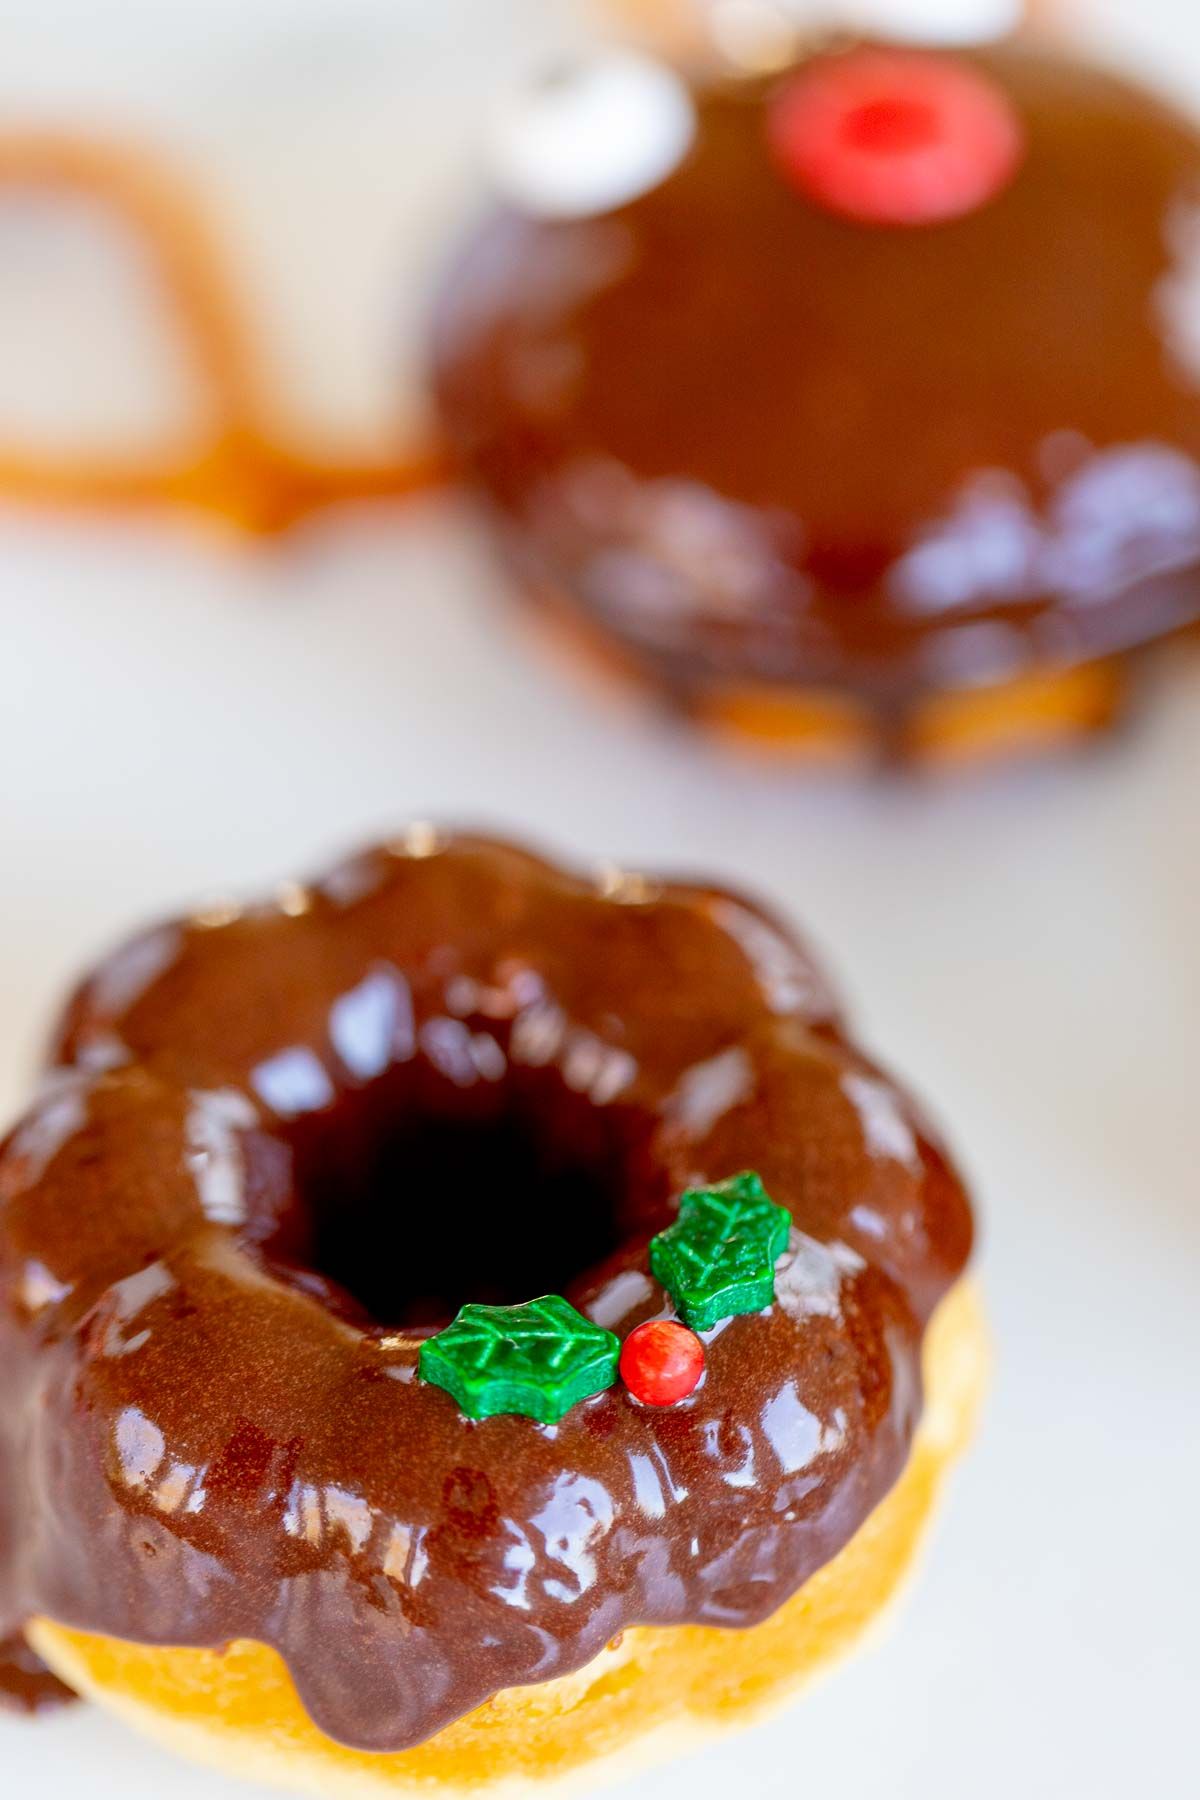 A homemade chocolate Christmas donut on a marble surface.